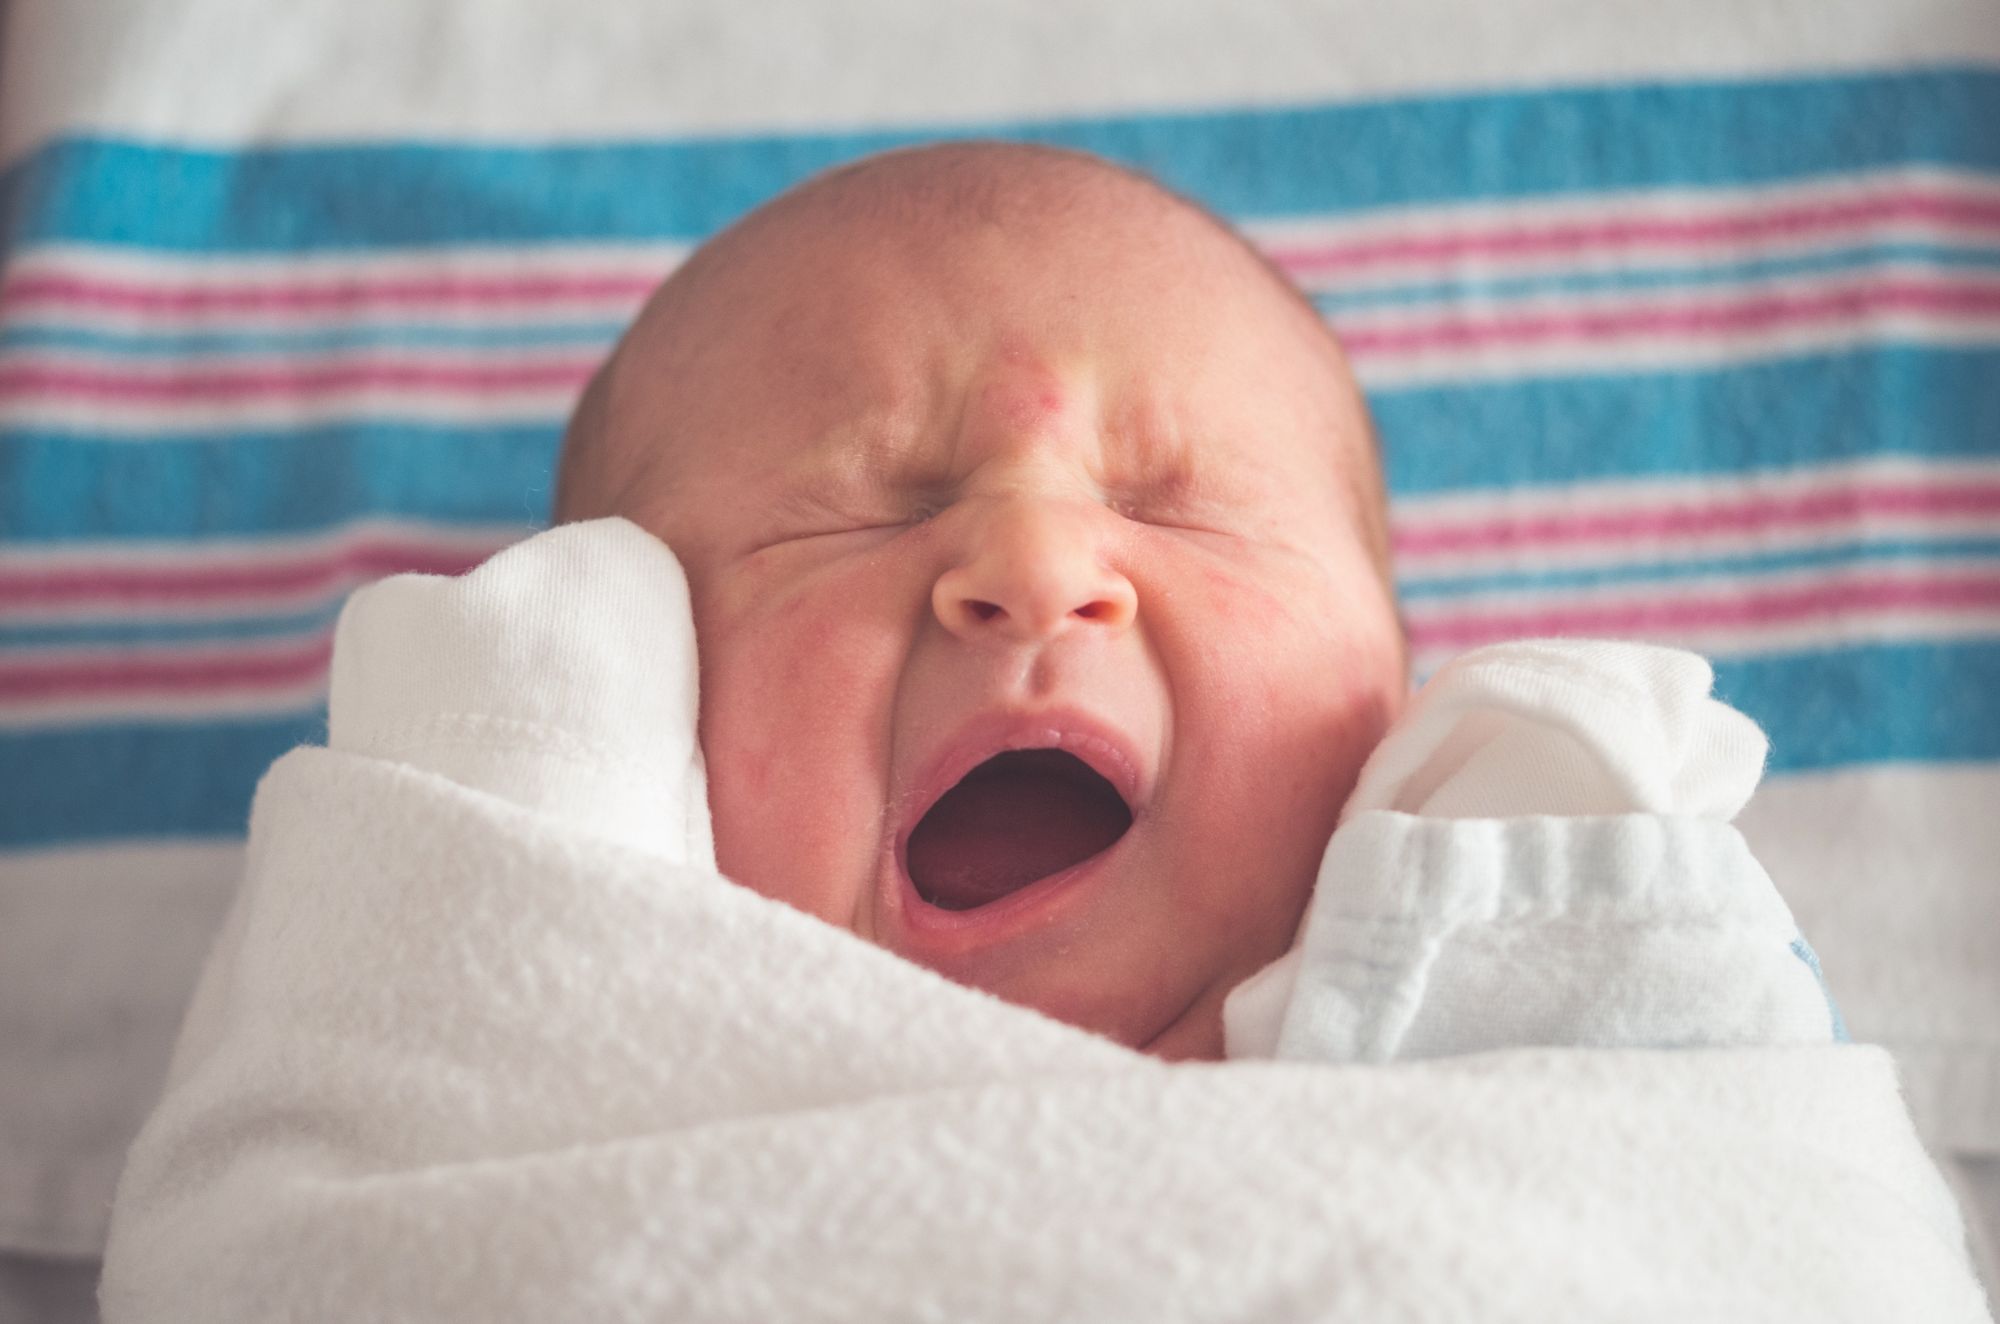 A newborn baby yawning while swaddled in a blanket. Contrasted with a teal and pink striped newborn blanket in background.